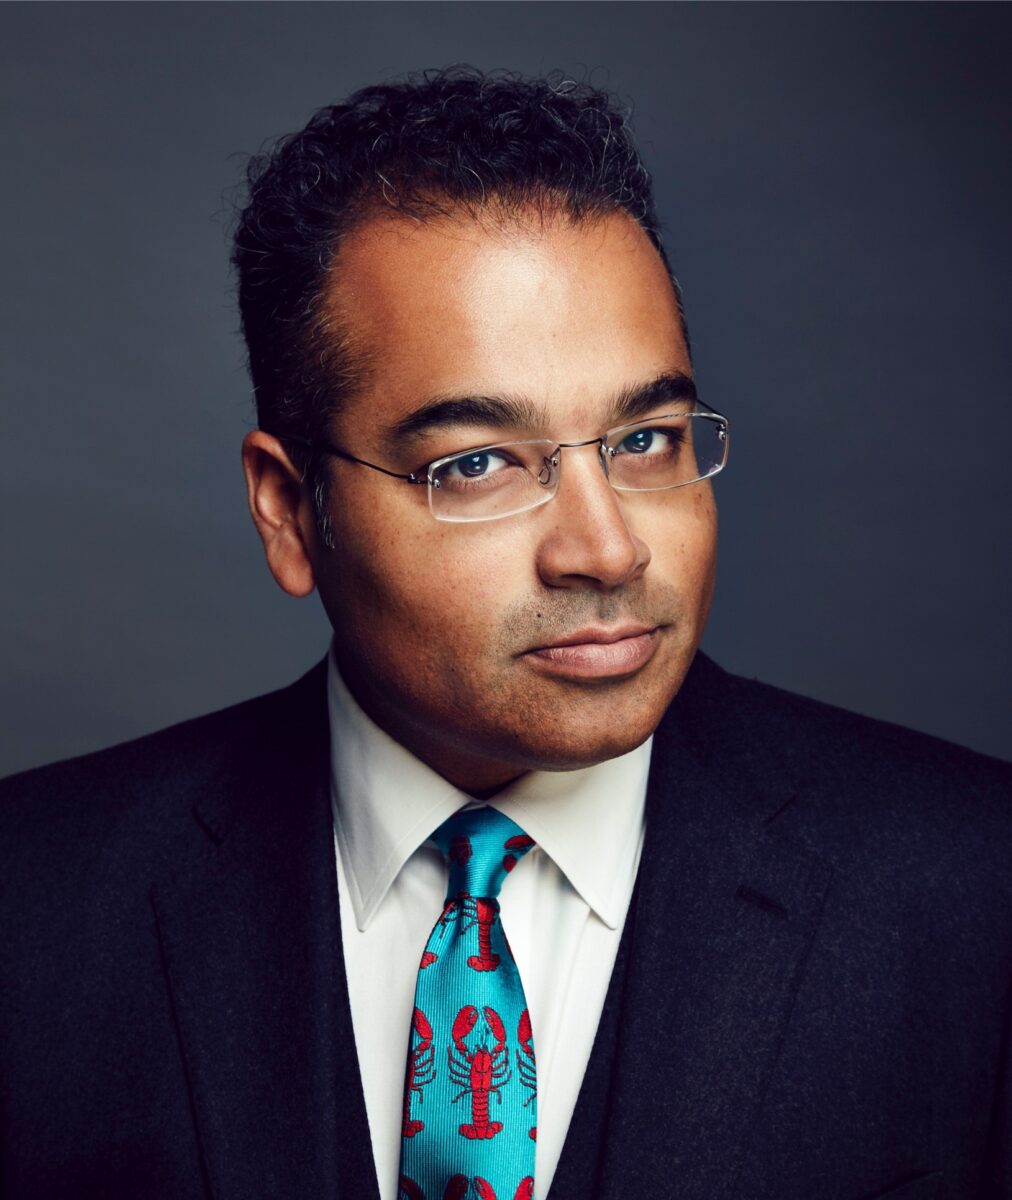 Krishnan Guru-Murthy makes guest appearance on The Traitors: Uncloaked